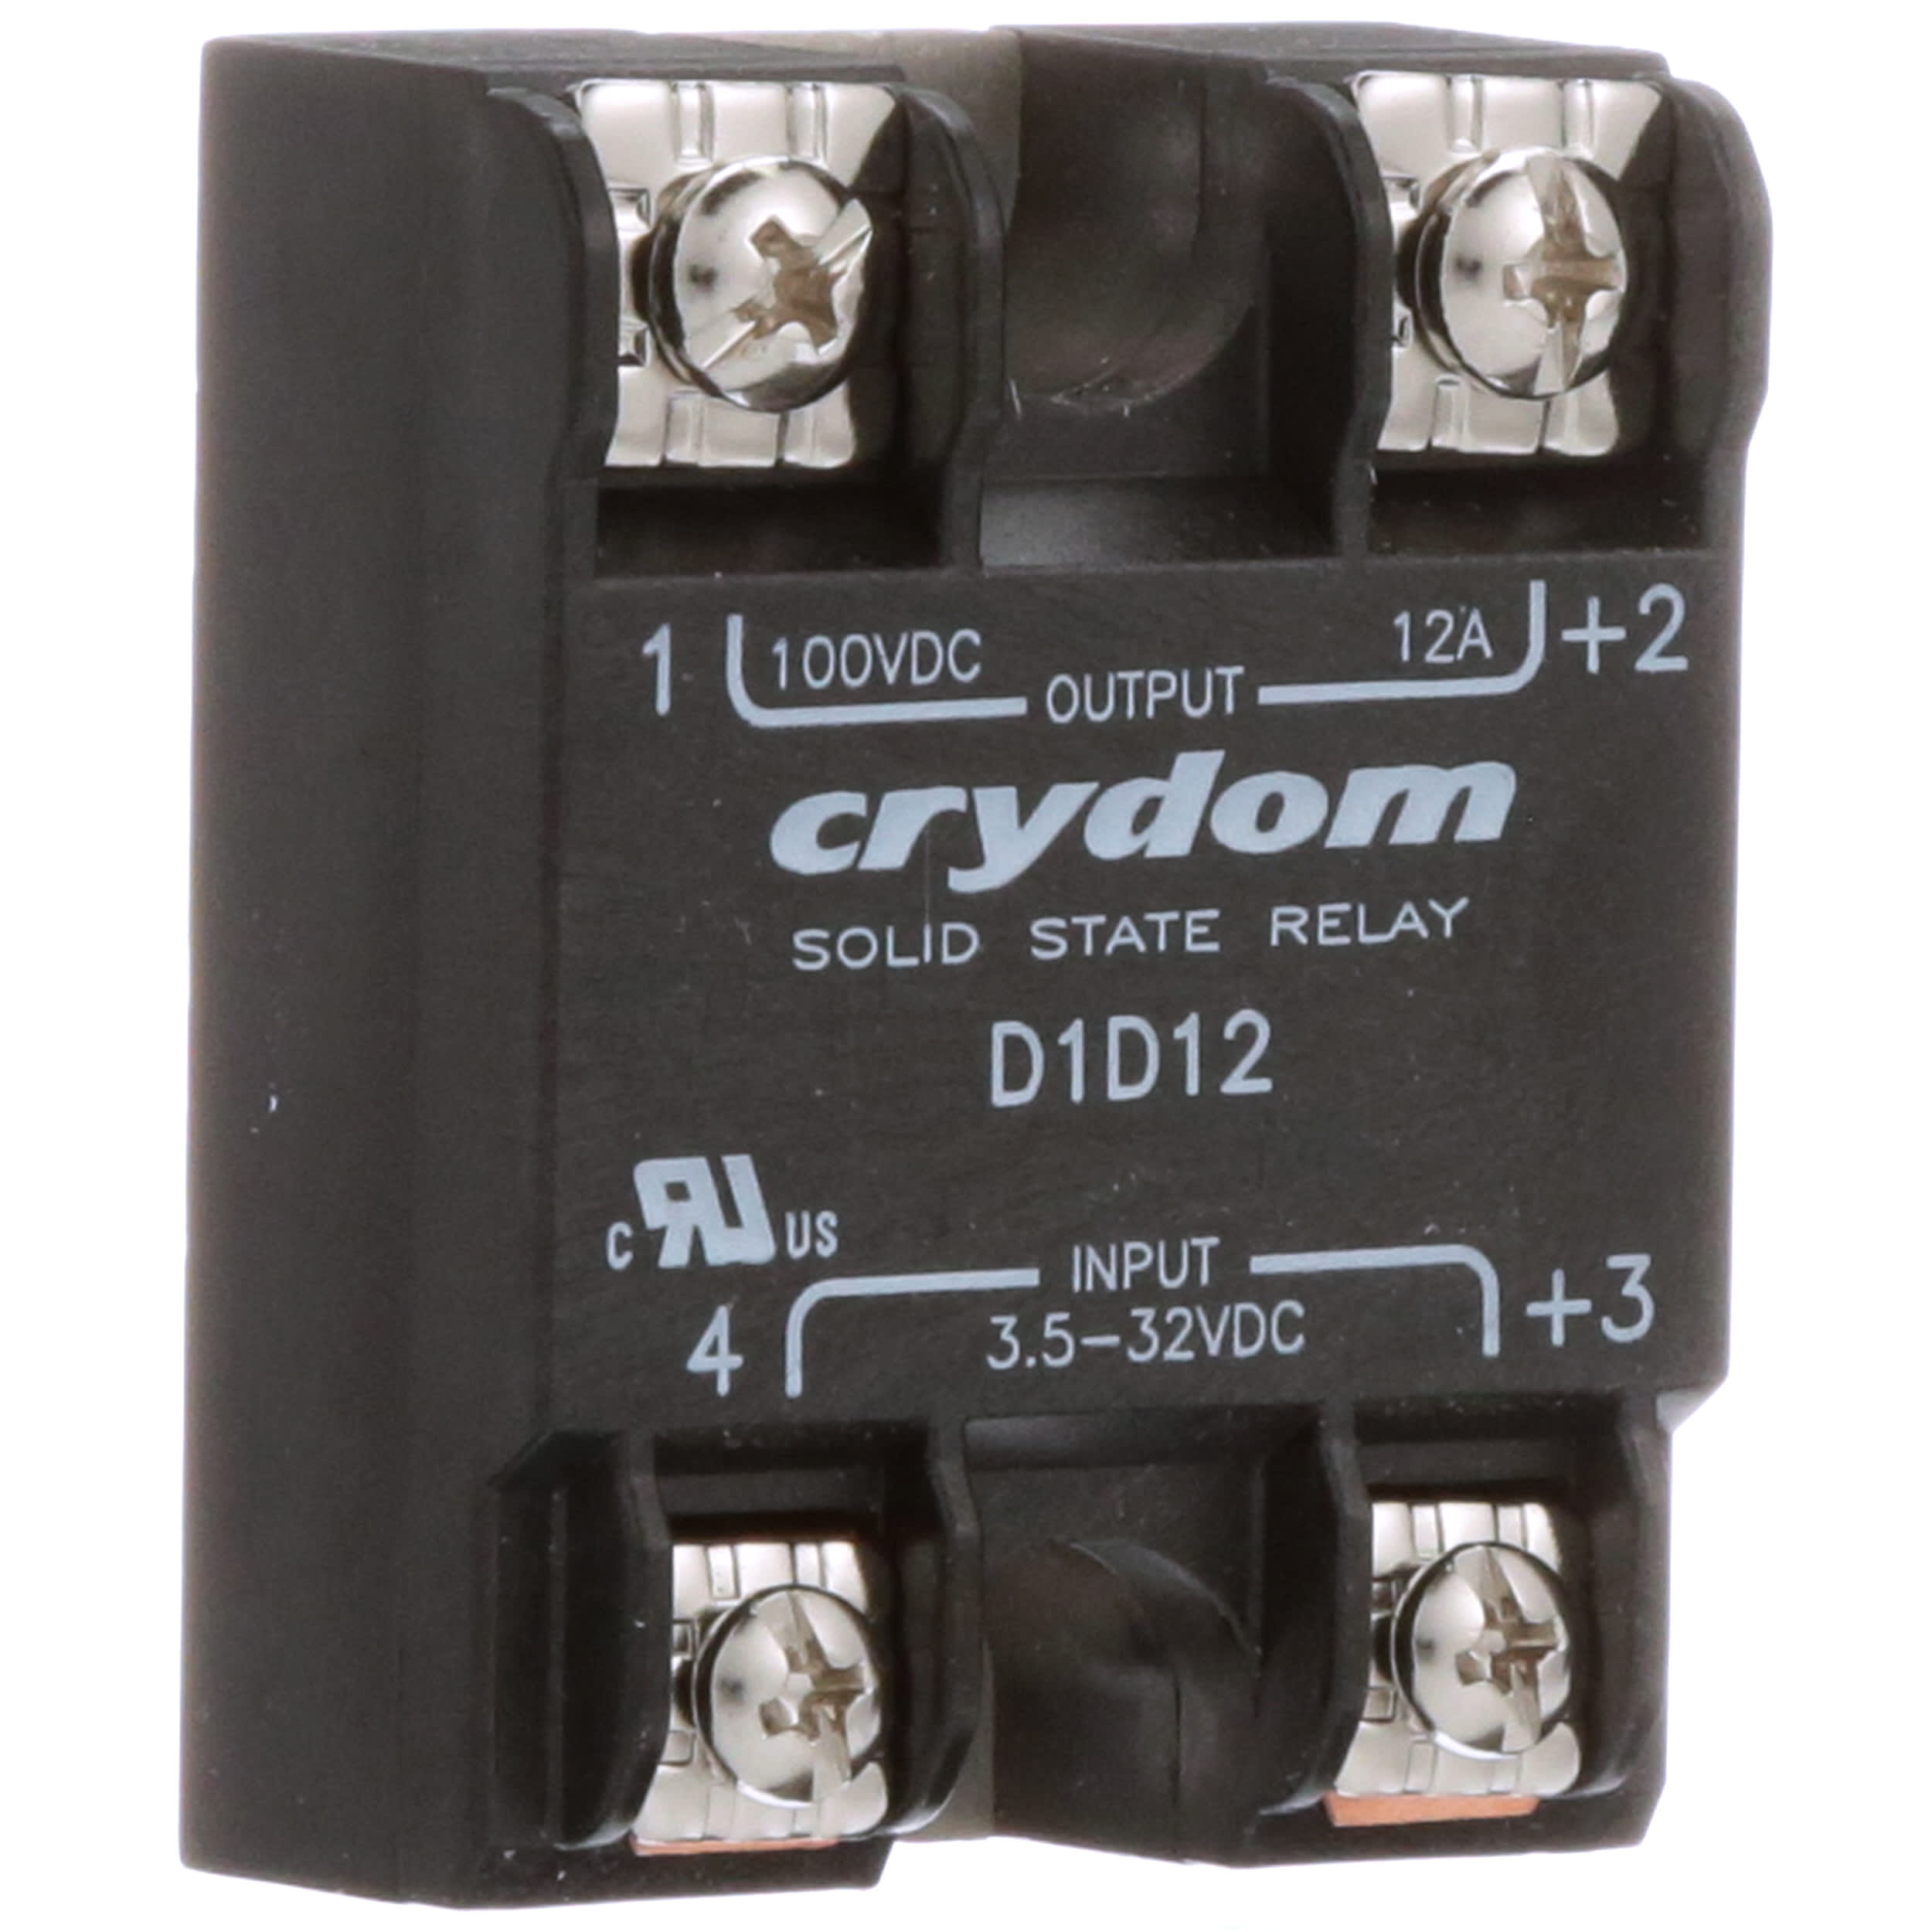 NEW CRYDOM D1D12 SOLID STATE RELAY